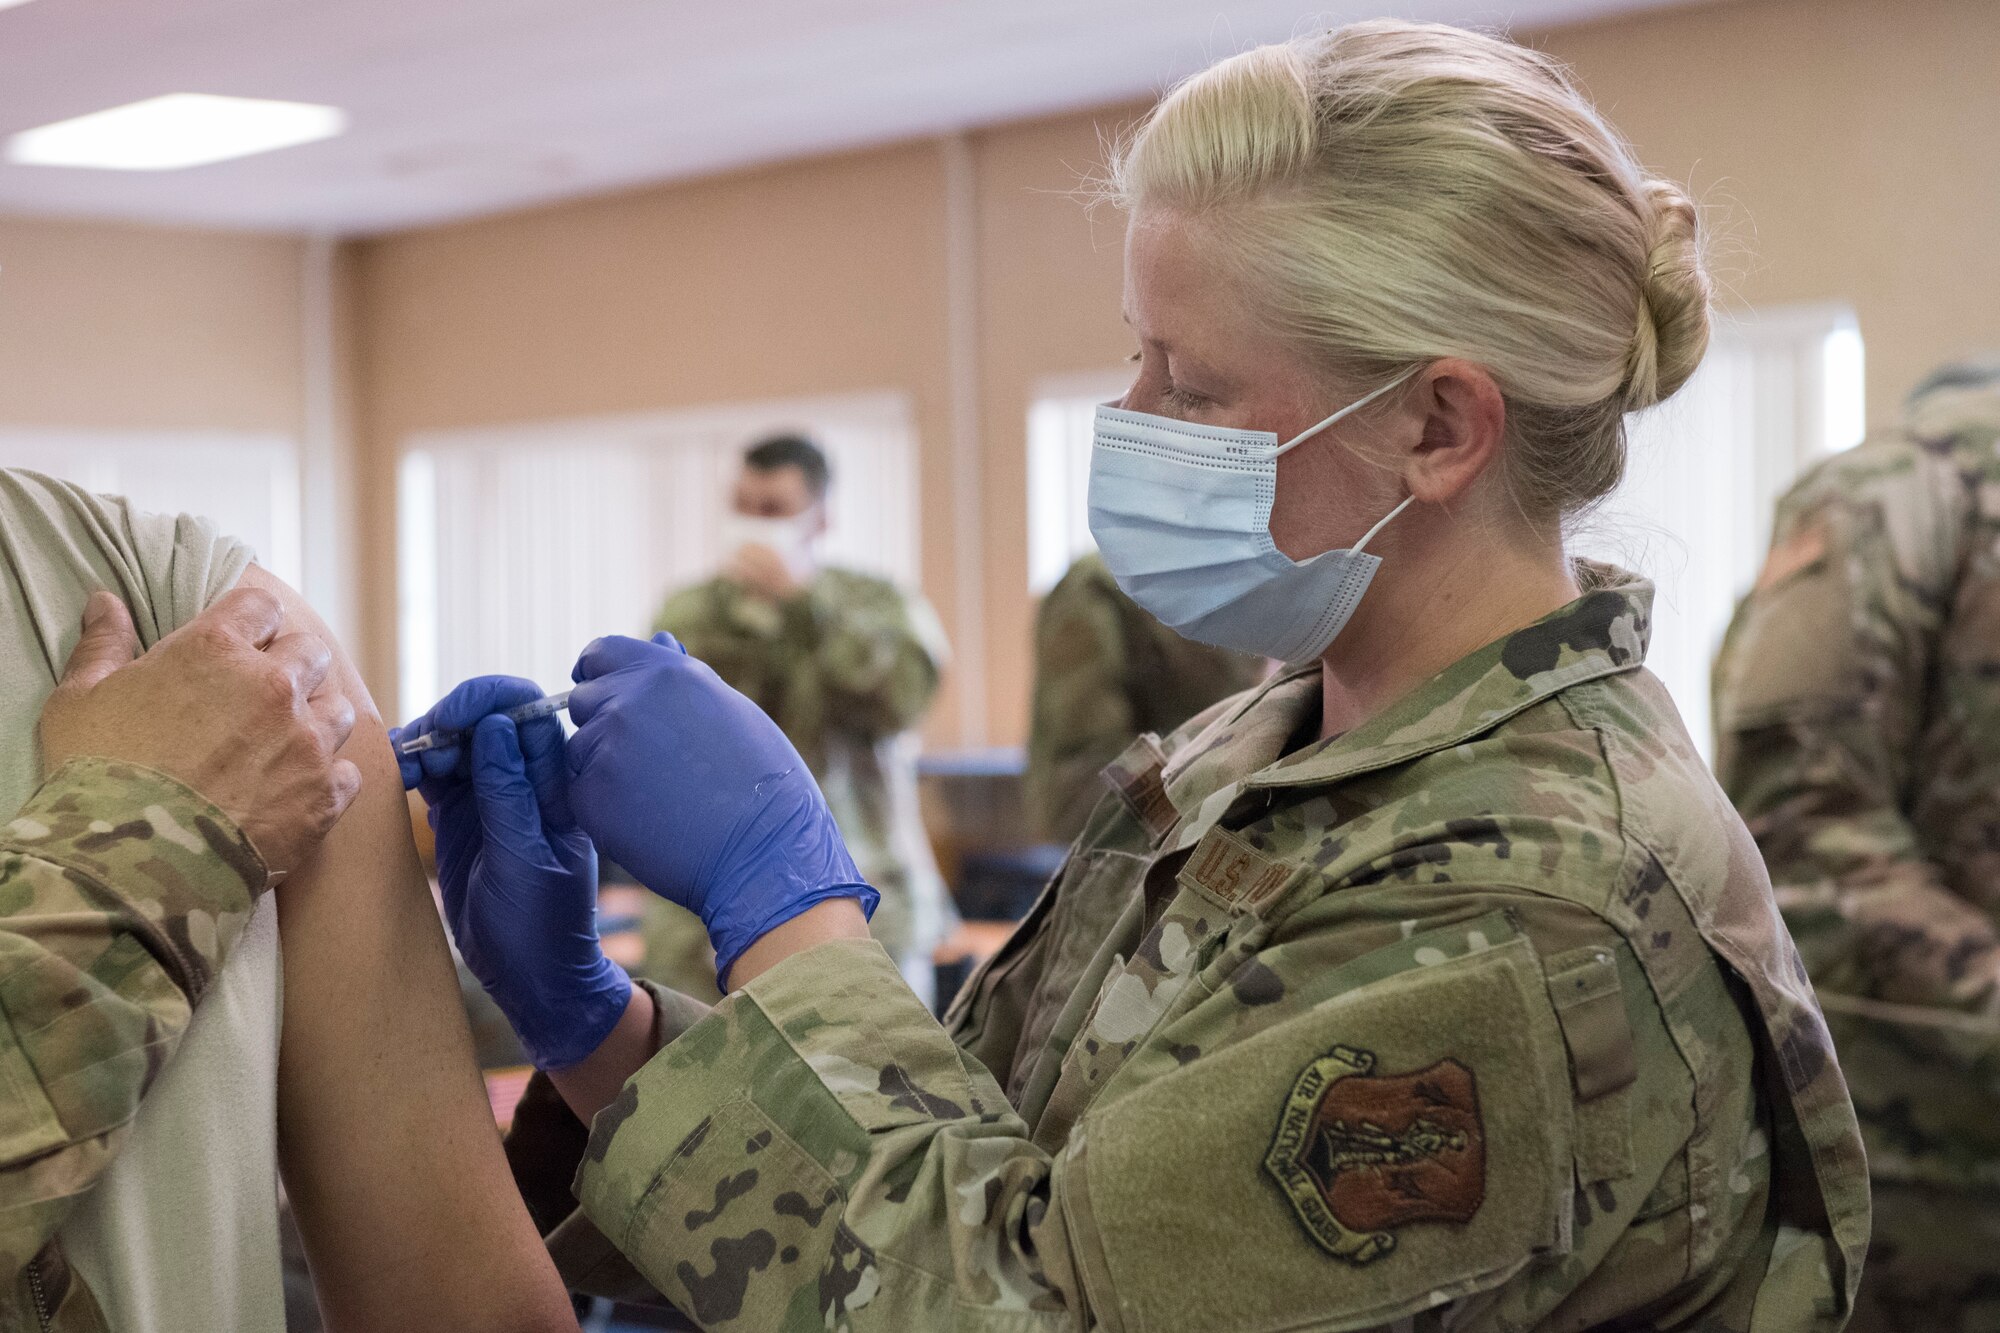 U.S. Air Force Staff Sgt. Katie Farrell, an aerospace medical technician with the 167th Medical Group assigned to the West Virginia National Guard’s Task Force Medical – East, administers a Pfizer COVID-19 vaccine to an Airman in the 167th Airlift Wing dining facility, Martinsburg, West Virginia, April 11, 2021. The vaccine is administered in two shots, with the second shot administered no more than six weeks after the first.